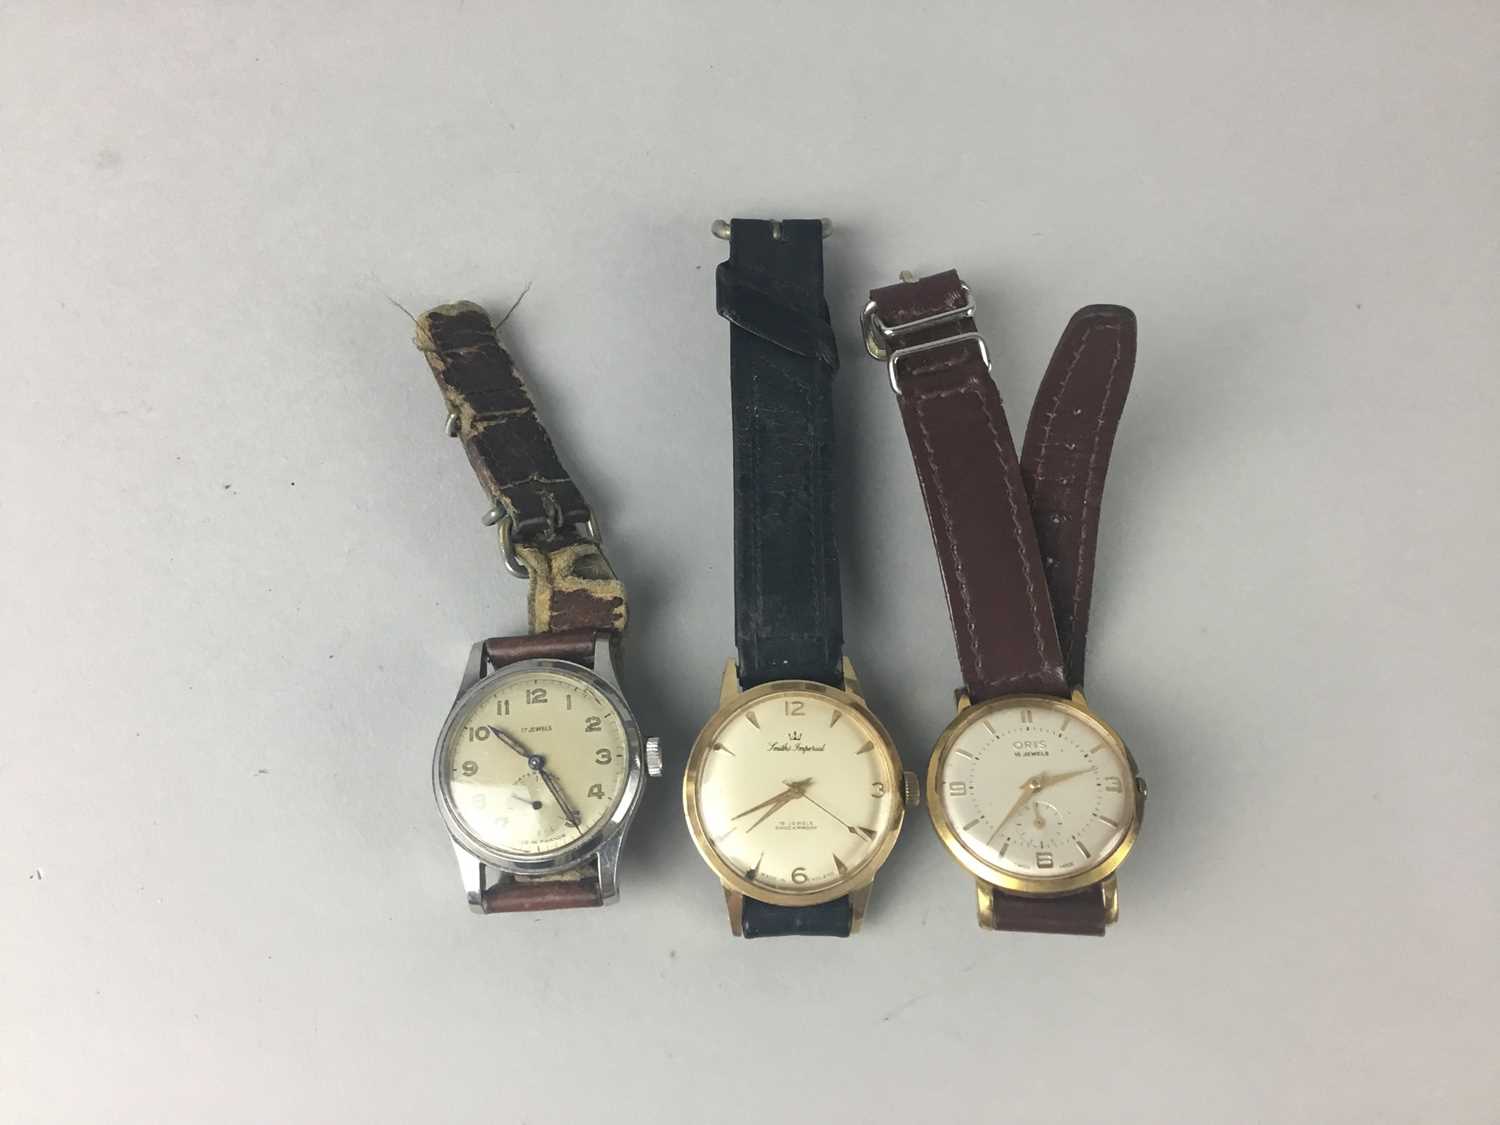 Lot 11 - A GENT'S SMITHS IMPERIAL WRIST WATCH ALONG WITH TWO OTHERS